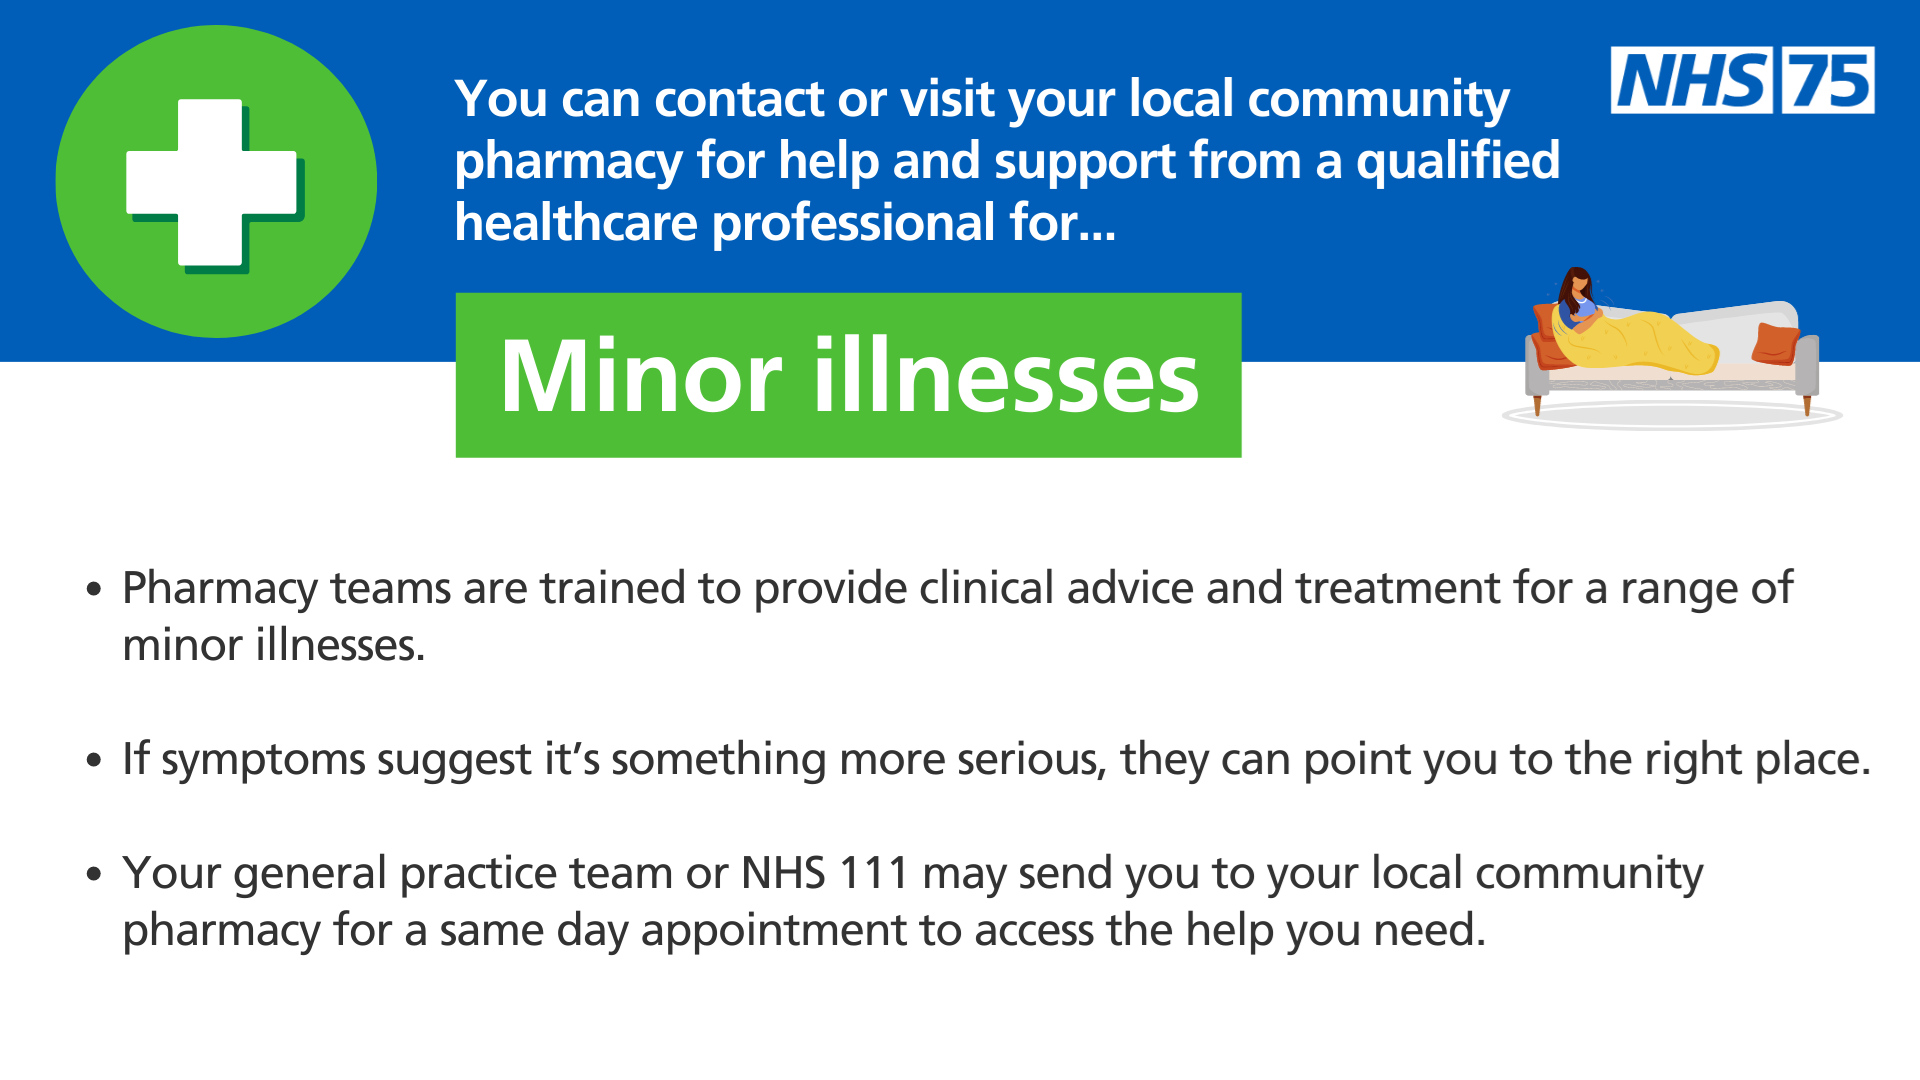 You can contact or visit your local community pharmacy for help and support from a qualified healthcare professional for minor illnesses